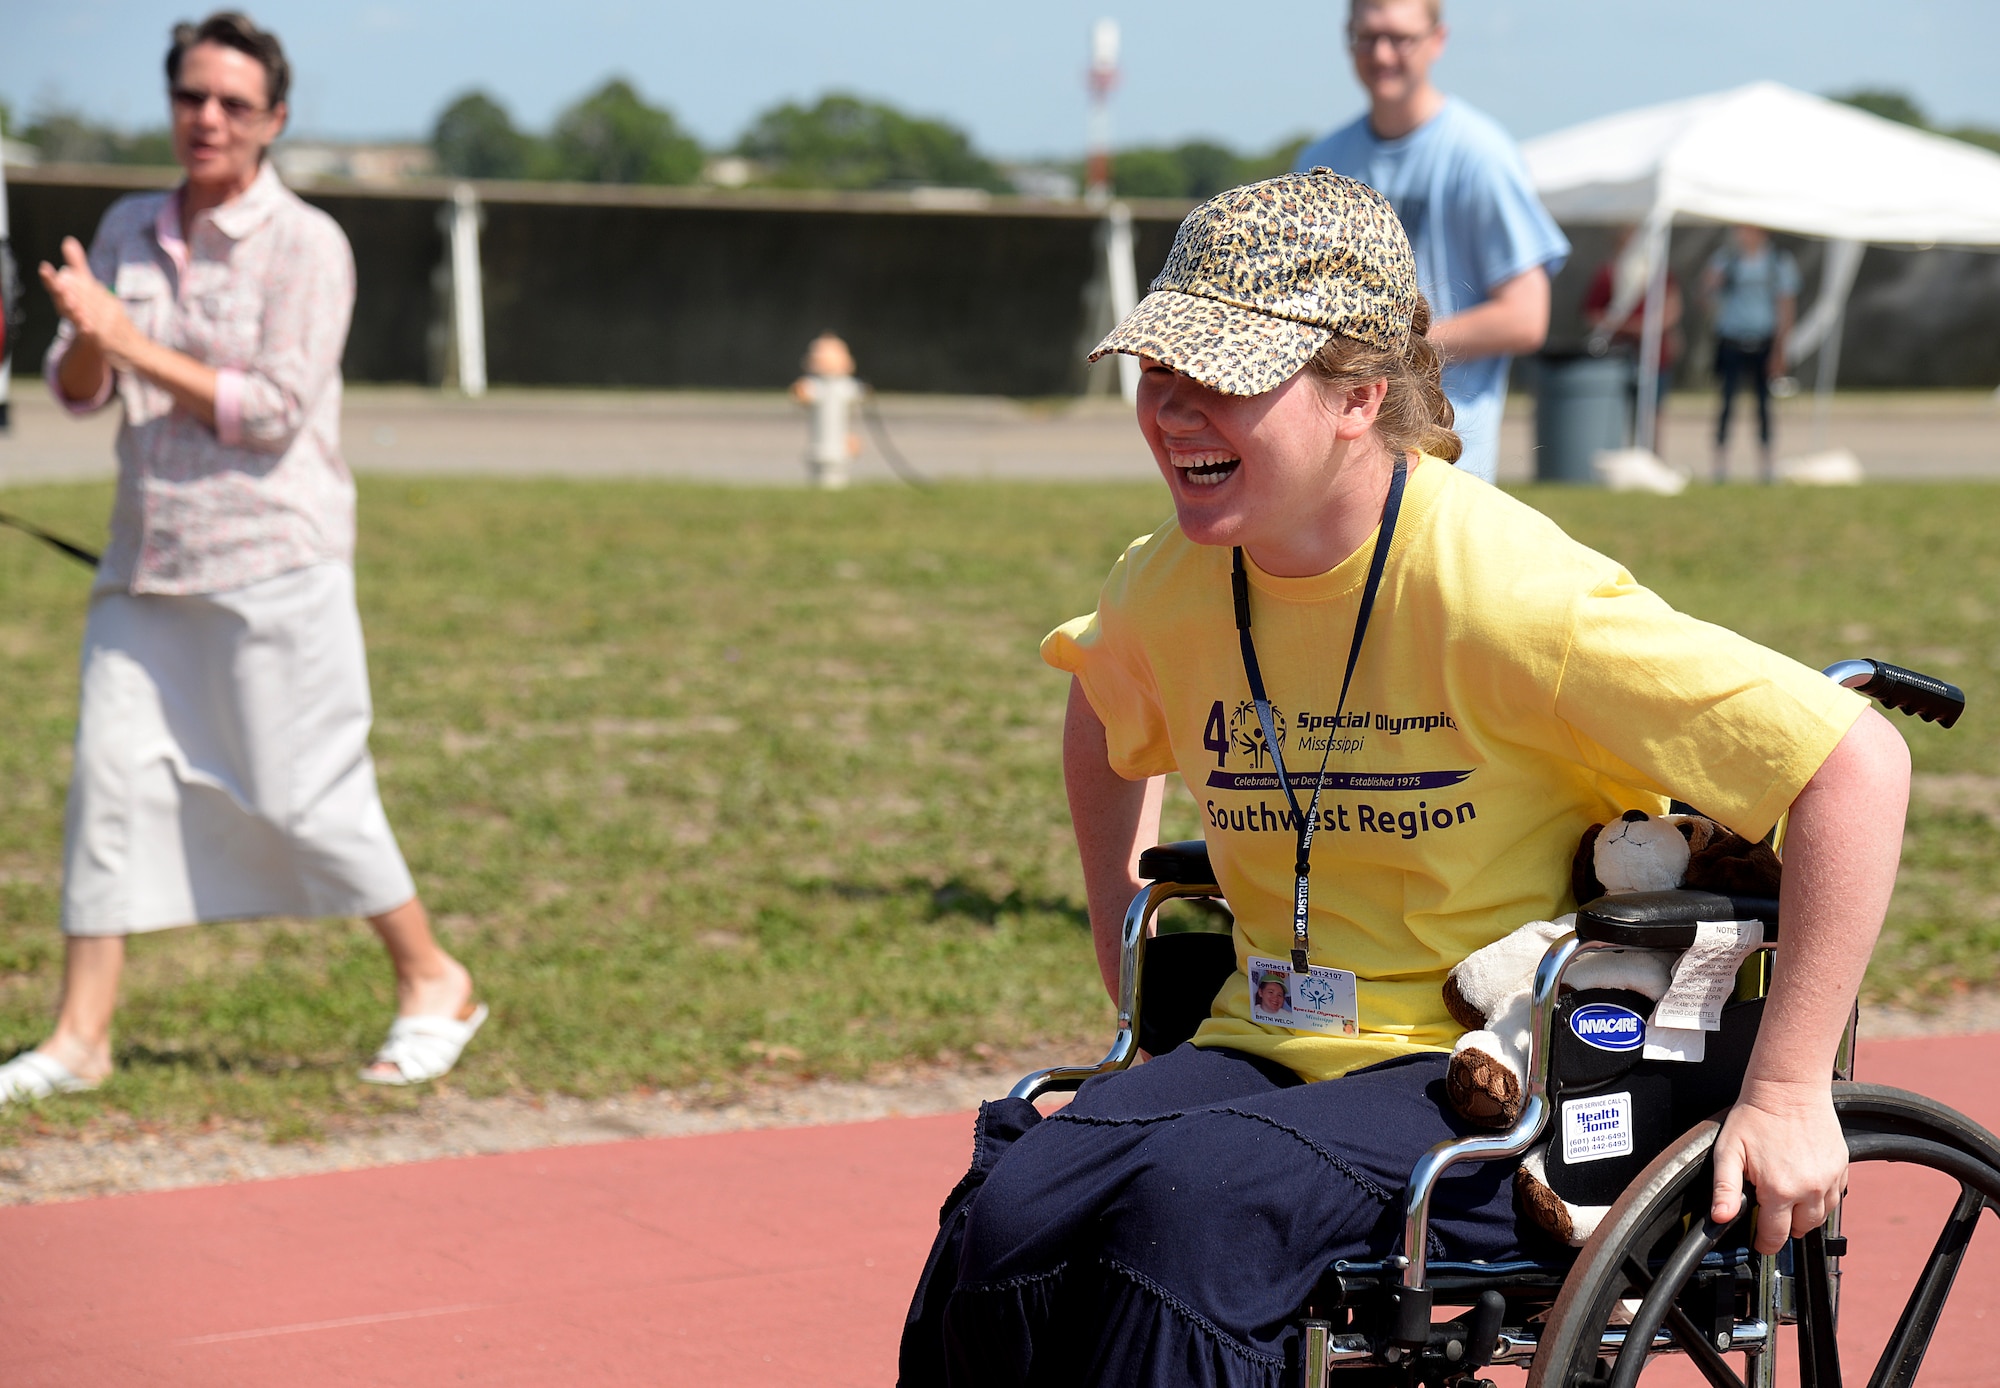 Britni Welch, Special Olympics athlete, participates in the wheelchair race at the 2015 Mississippi State Special Olympics, May 9, 2015, Keesler Air Force Base, Miss. Welch participated in the wheelchair race and tennis ball throw for her age group and won the gold medal in both sports. (U.S. Air Force photo by Senior Airman Holly Mansfield)